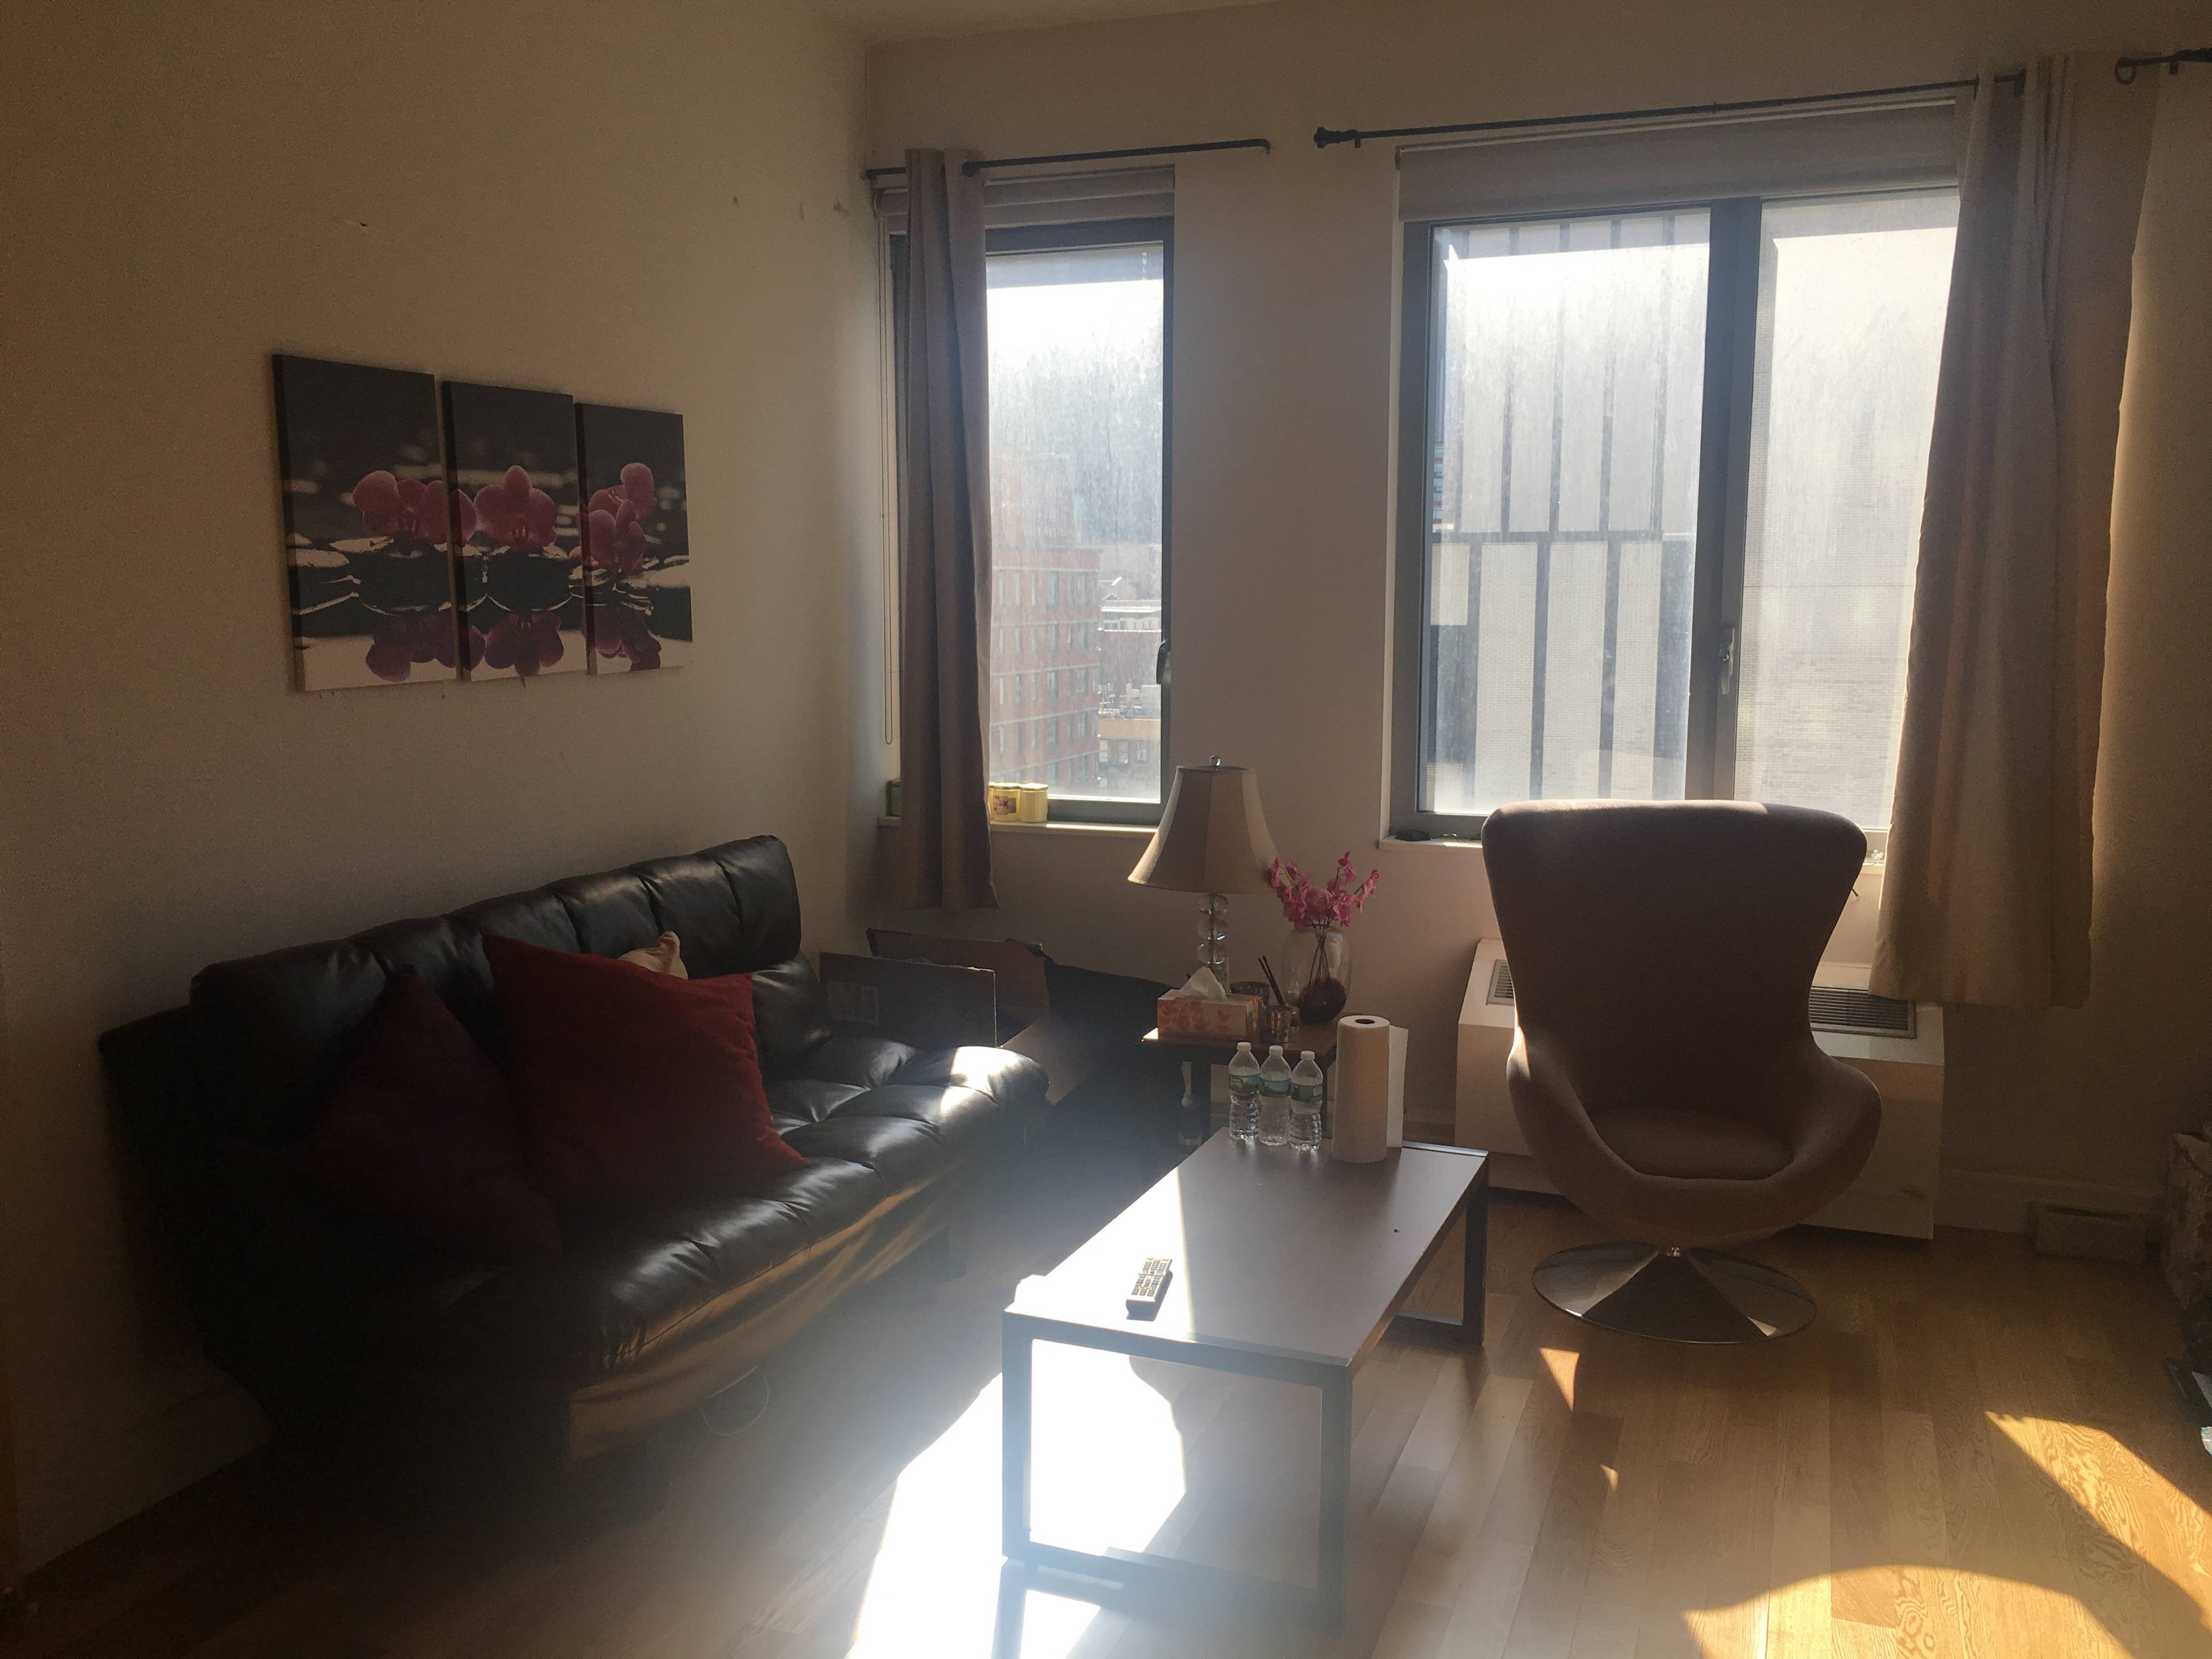 Short term fully furnished Luxury 1 Bedroom * Perfect for Summer * Washer Dryer in the unit * 24 hr Doorman / 2 Pools / Gym / Spa / Midtown West ** Close to Central Park